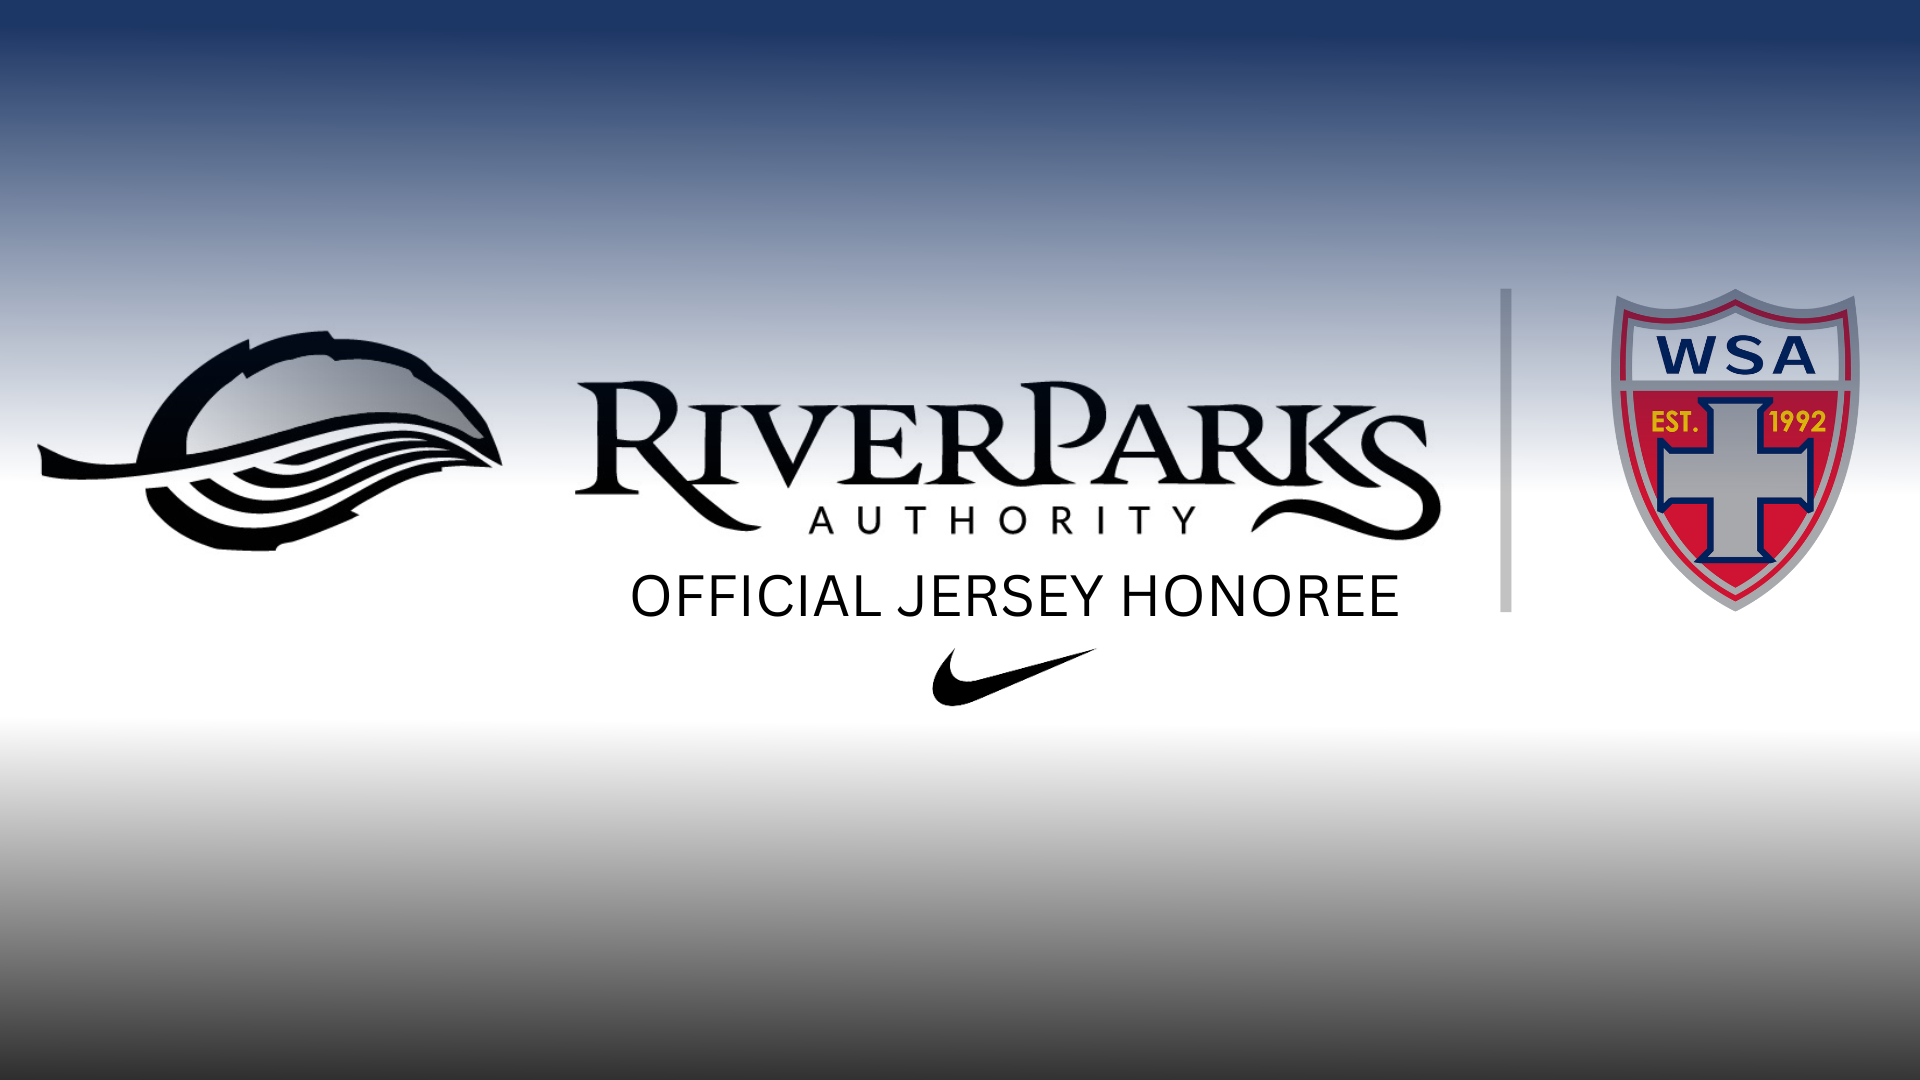 WSA SOCCER ANNOUNCES JERSEY HONOREE: River Parks Authority